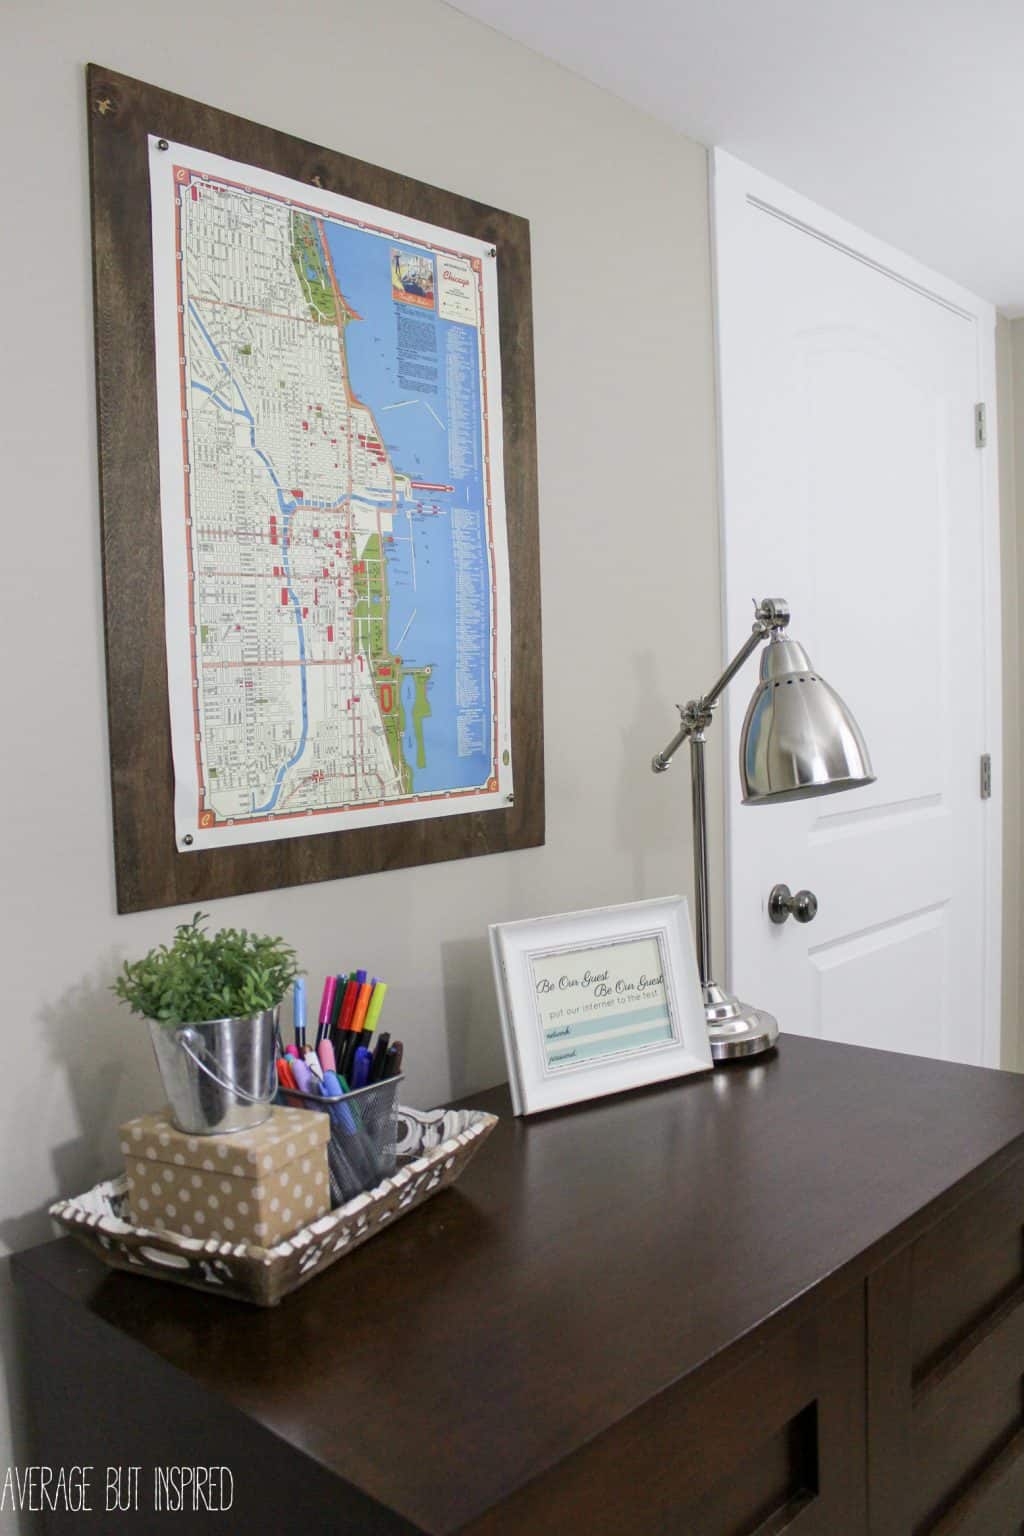 Give your large scale art a pretty "frame" with this easy DIY plywood poster frame project! You don't even have to cut the wood yourself! Find out all the details on how to "frame" your art in under 10 minutes!